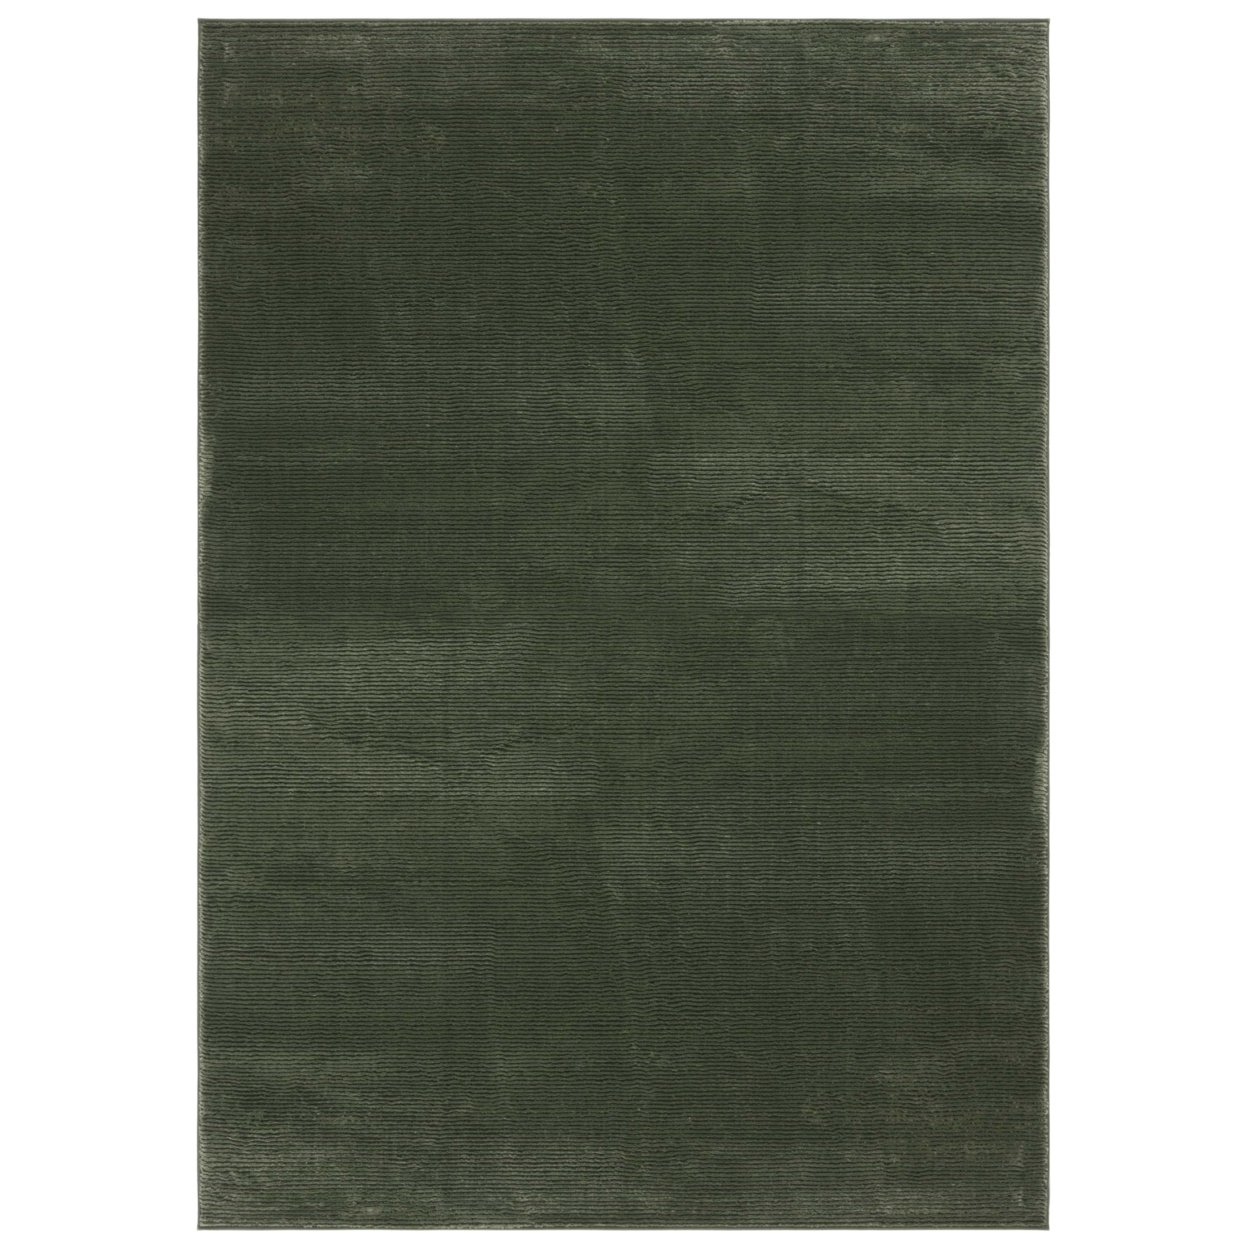 SAFAVIEH REV102Y Revive Green - Taupe, 9' X 12' Rectangle